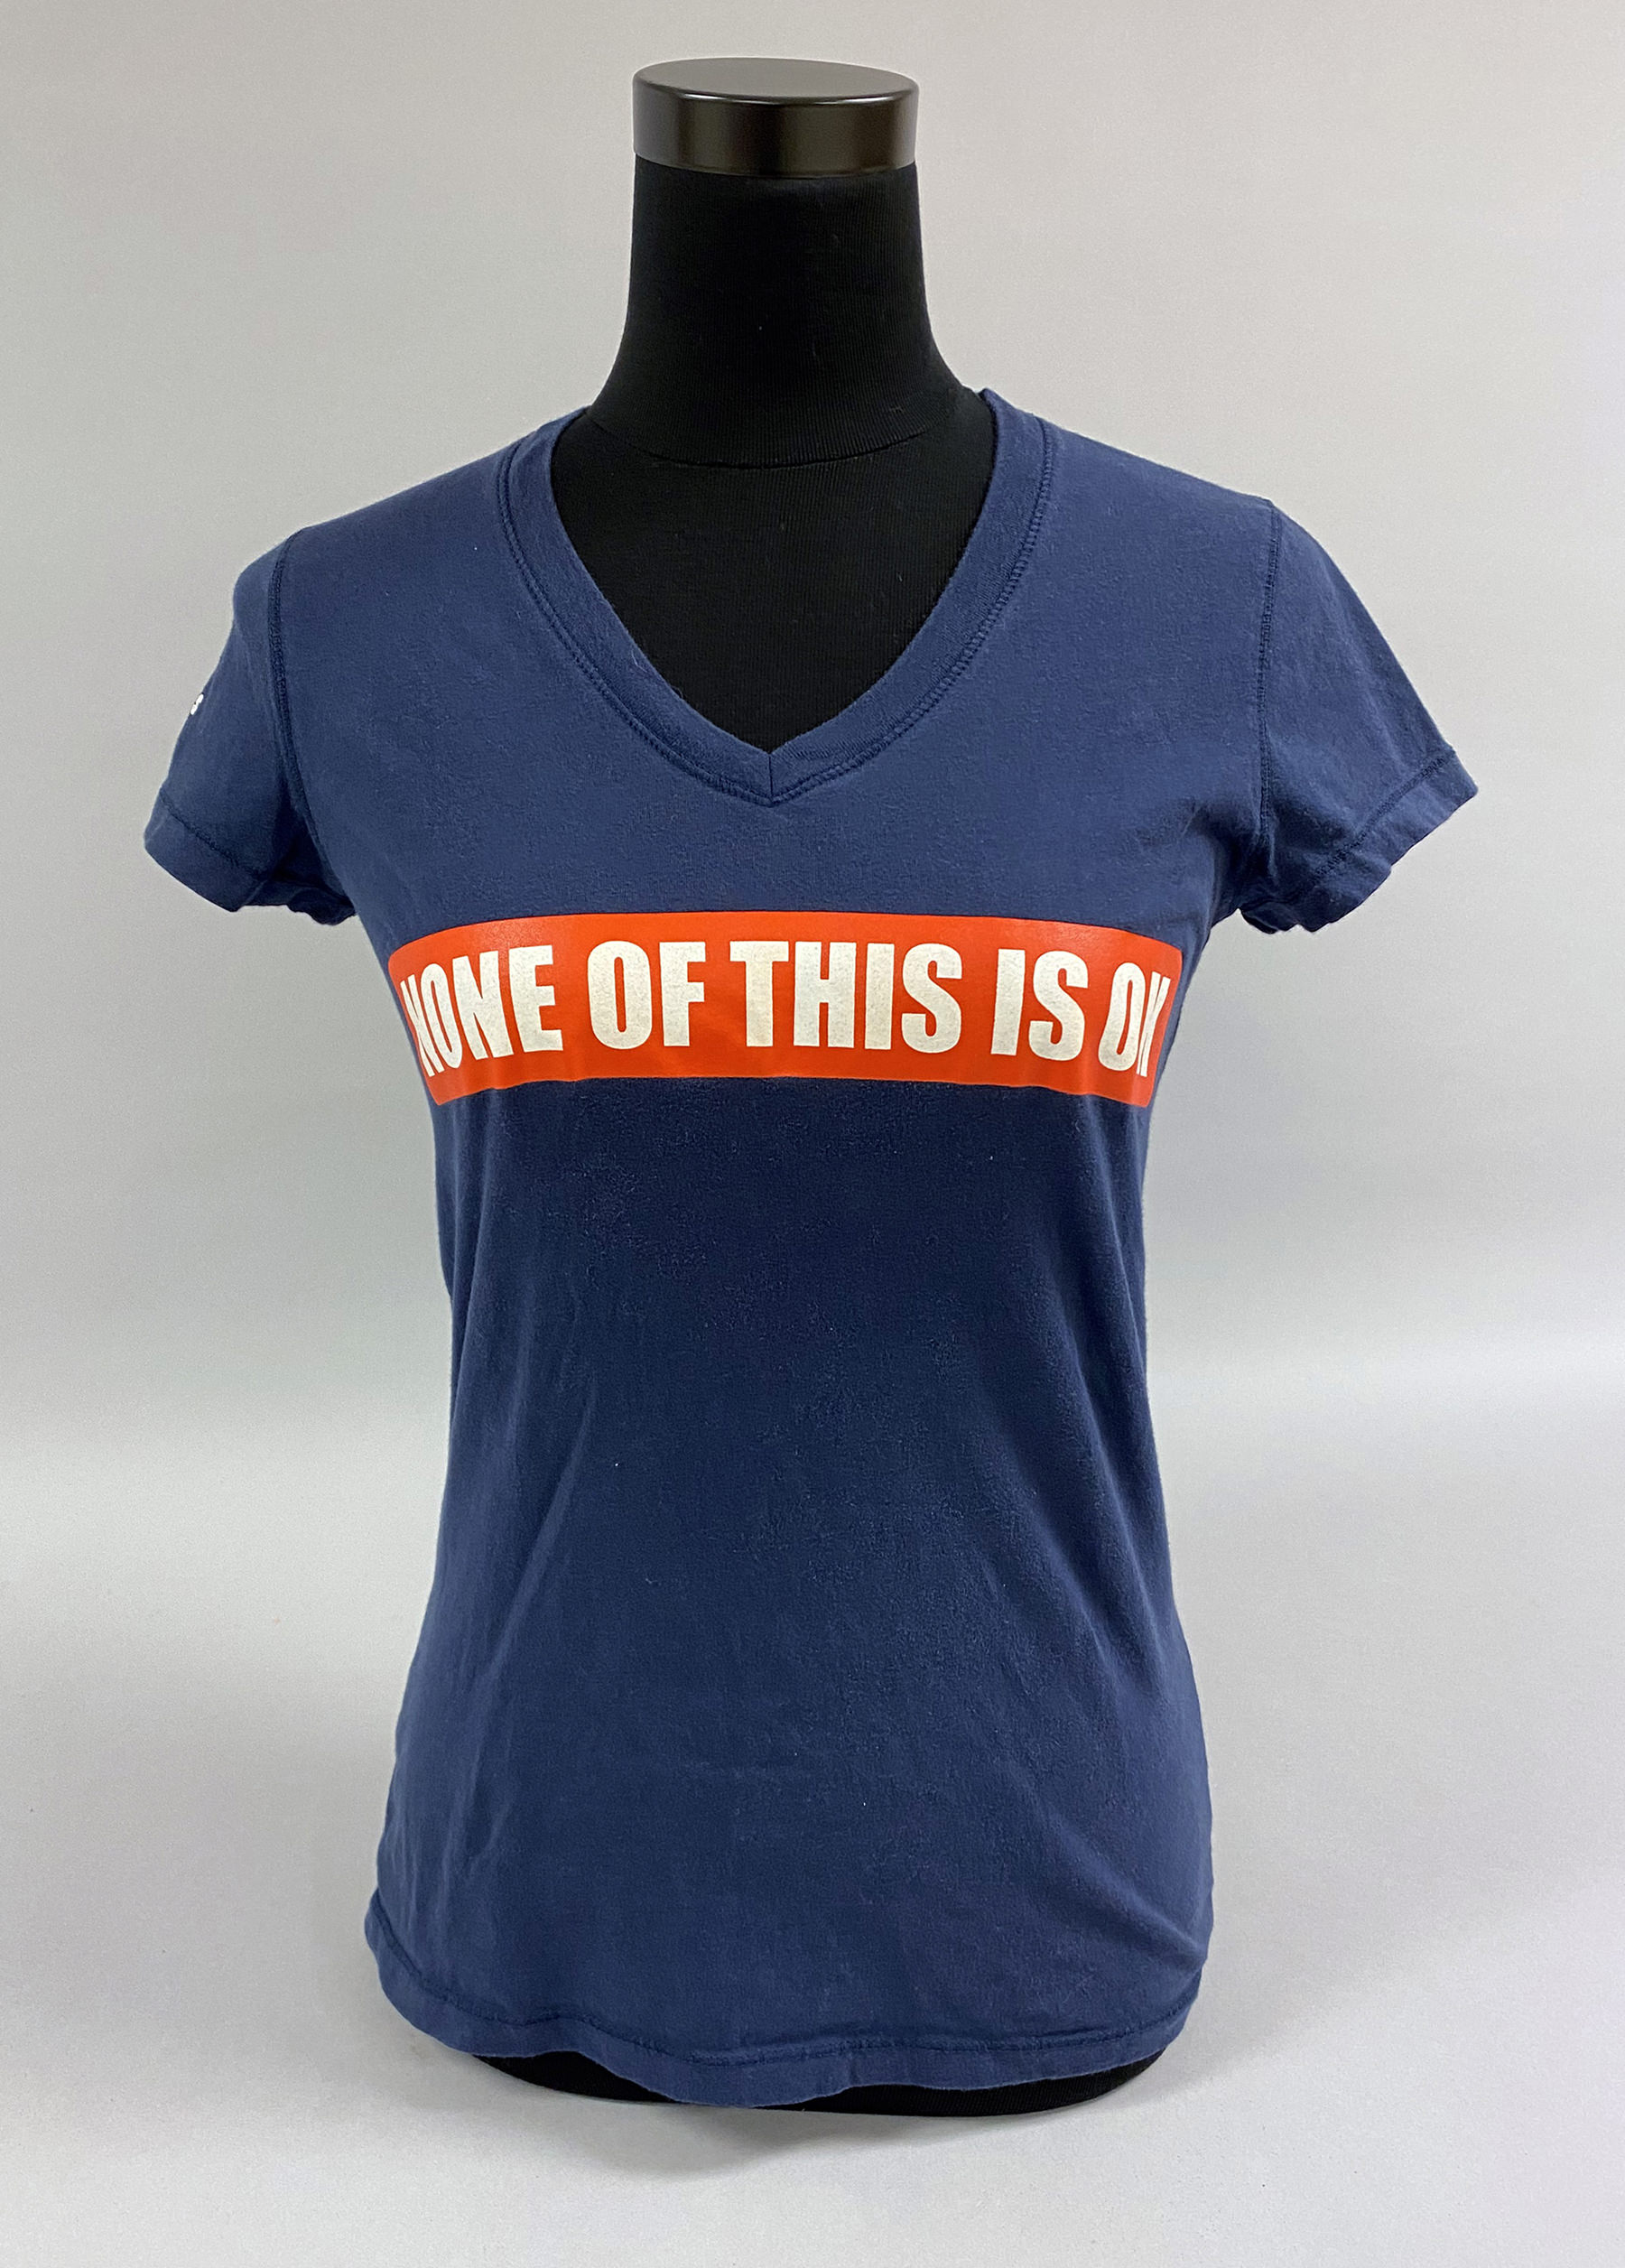 None of this is ok t-shirt